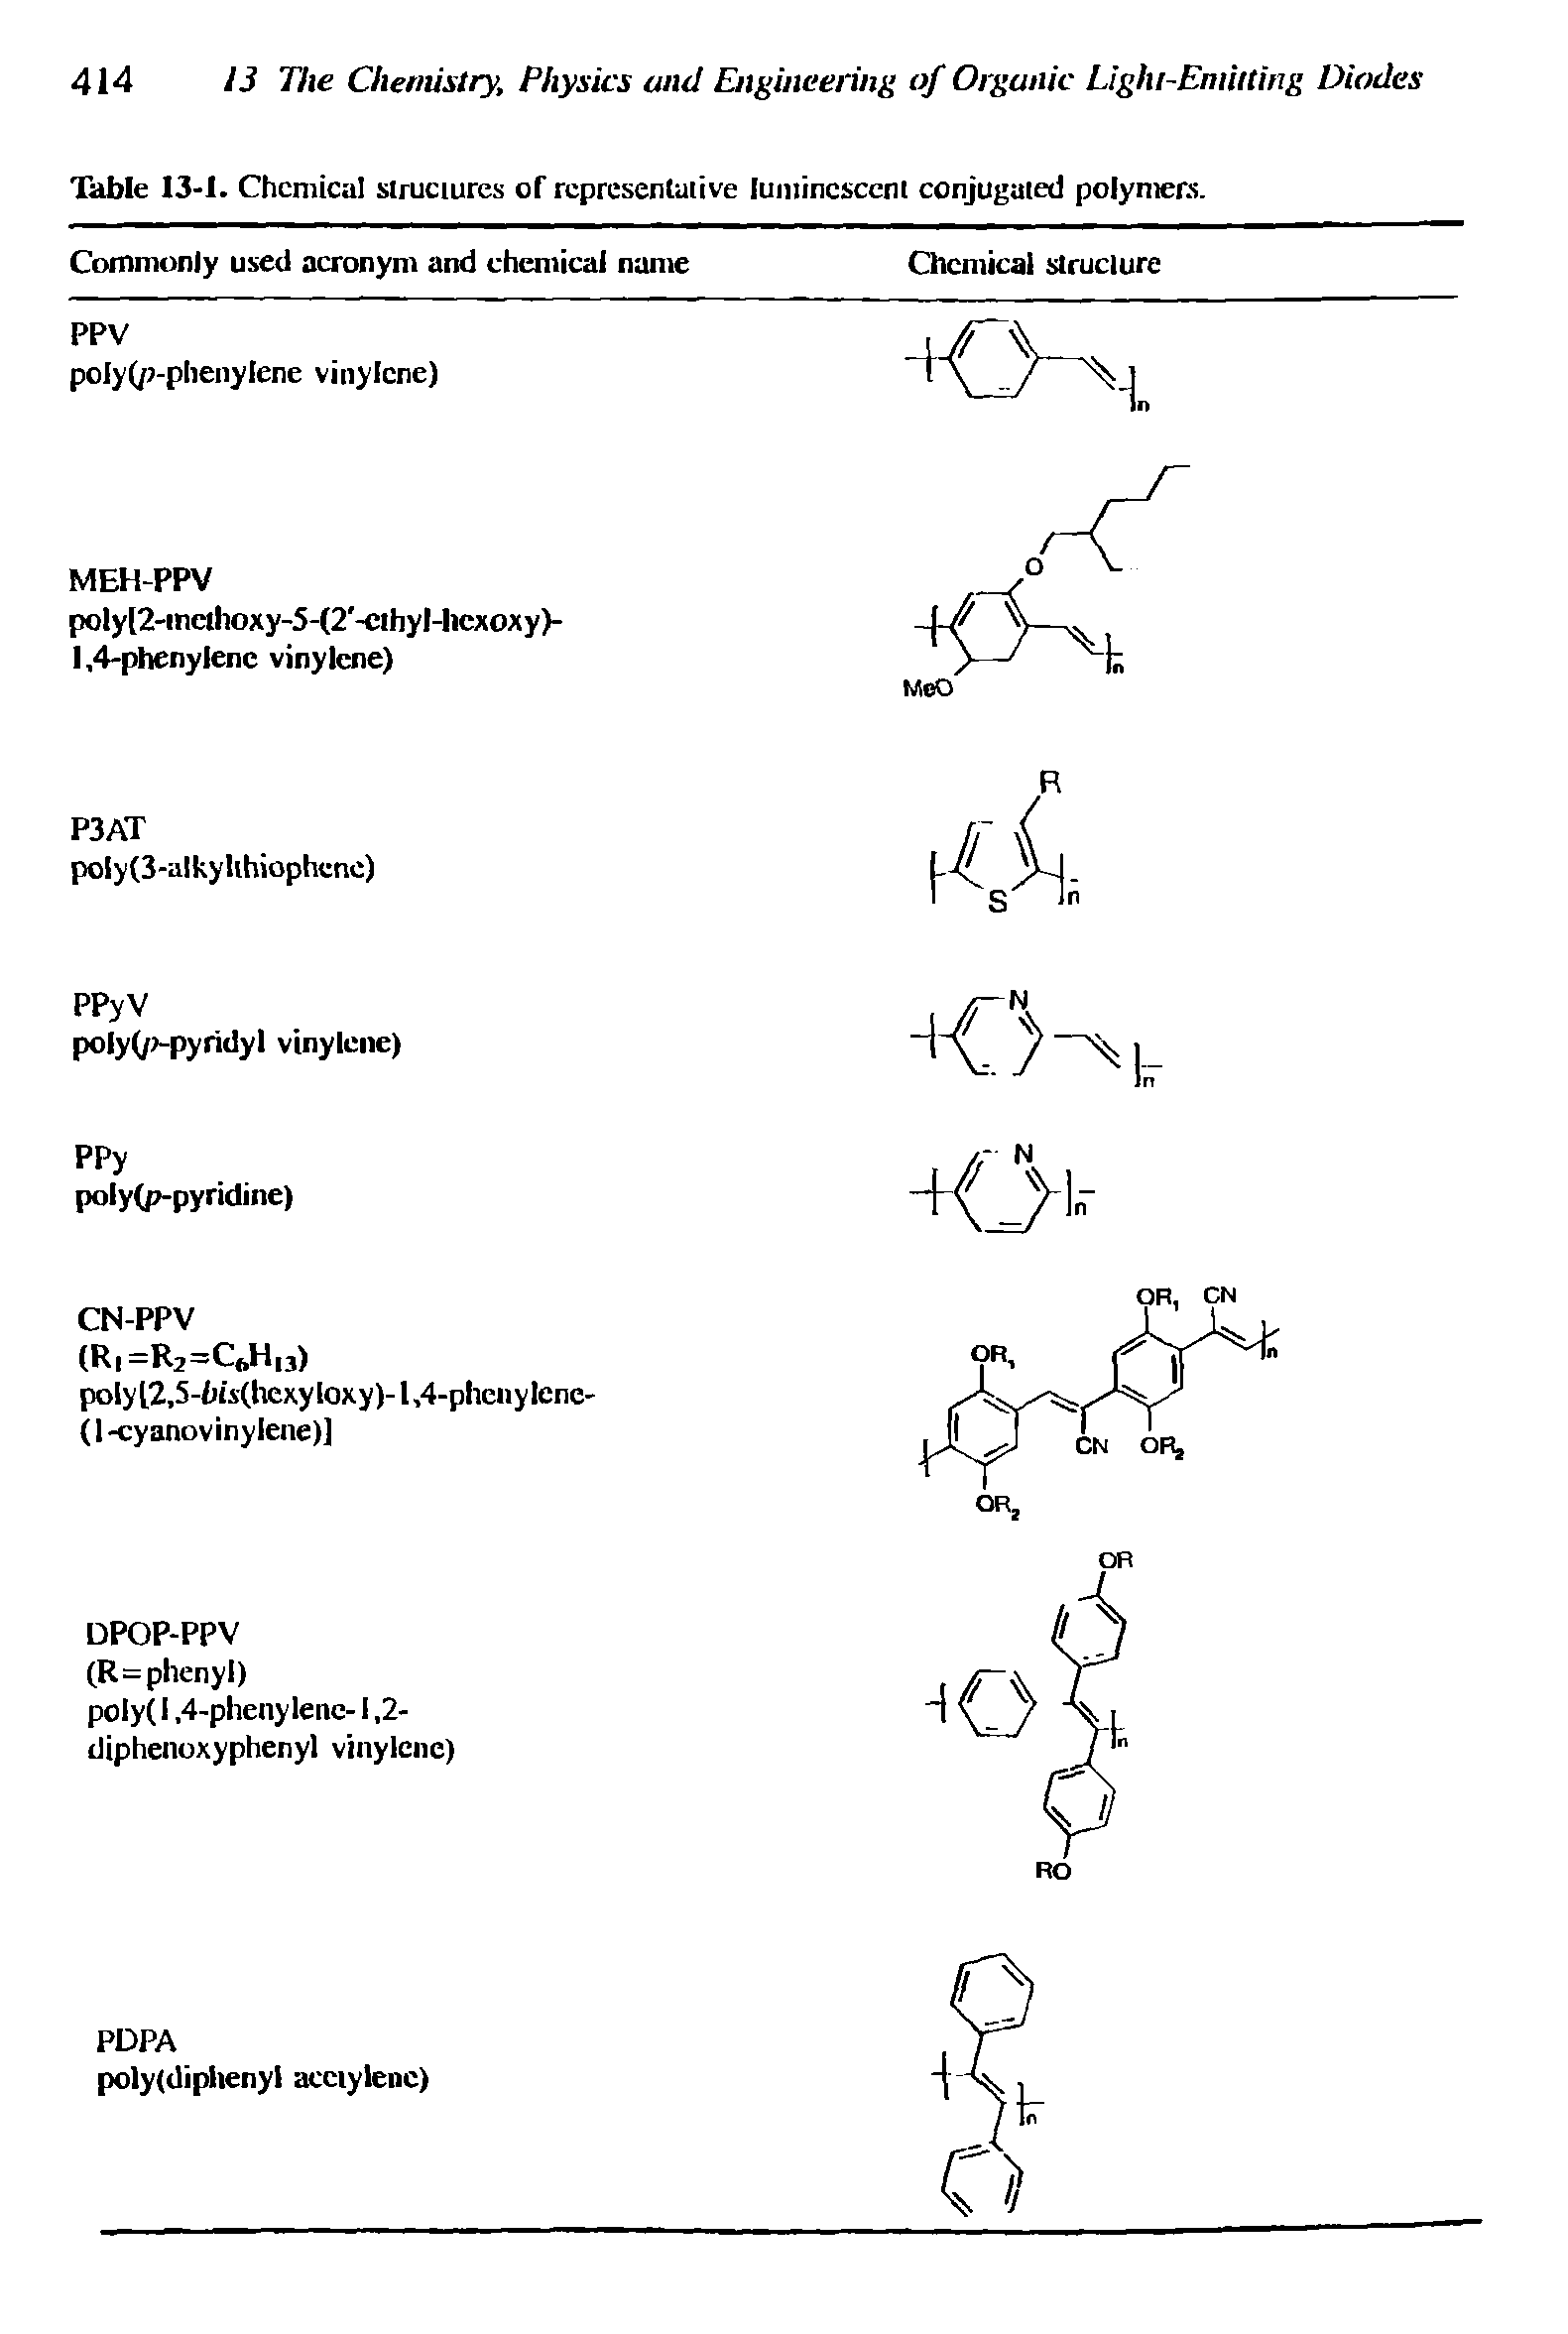 Table 13-1. Chemical structures of representative luminescent conjugated polymers.